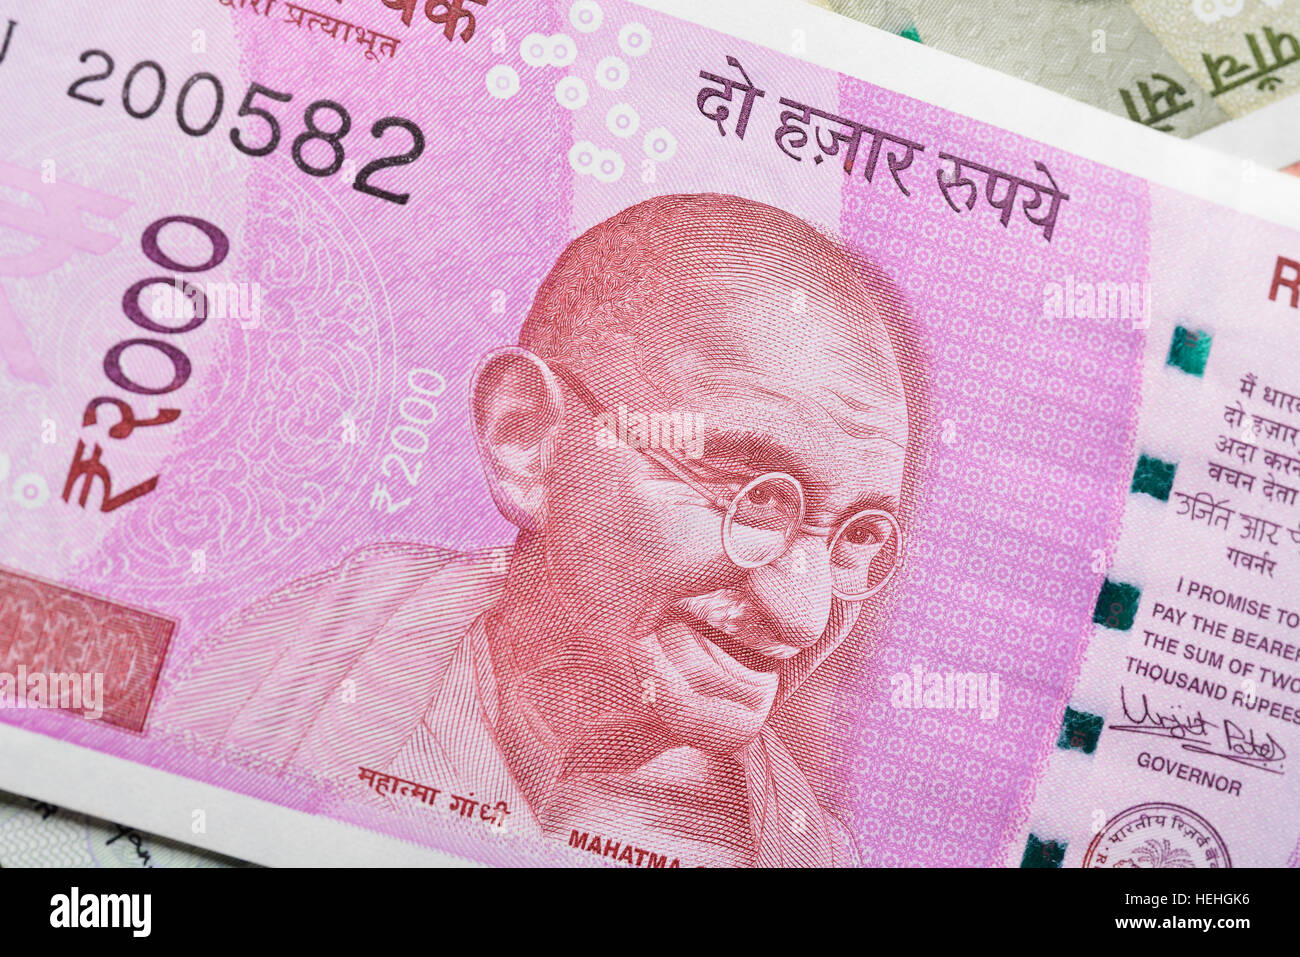 New Indian Two Thousand Rupee Note with Mahatma Gandhi Portrait Stock Photo